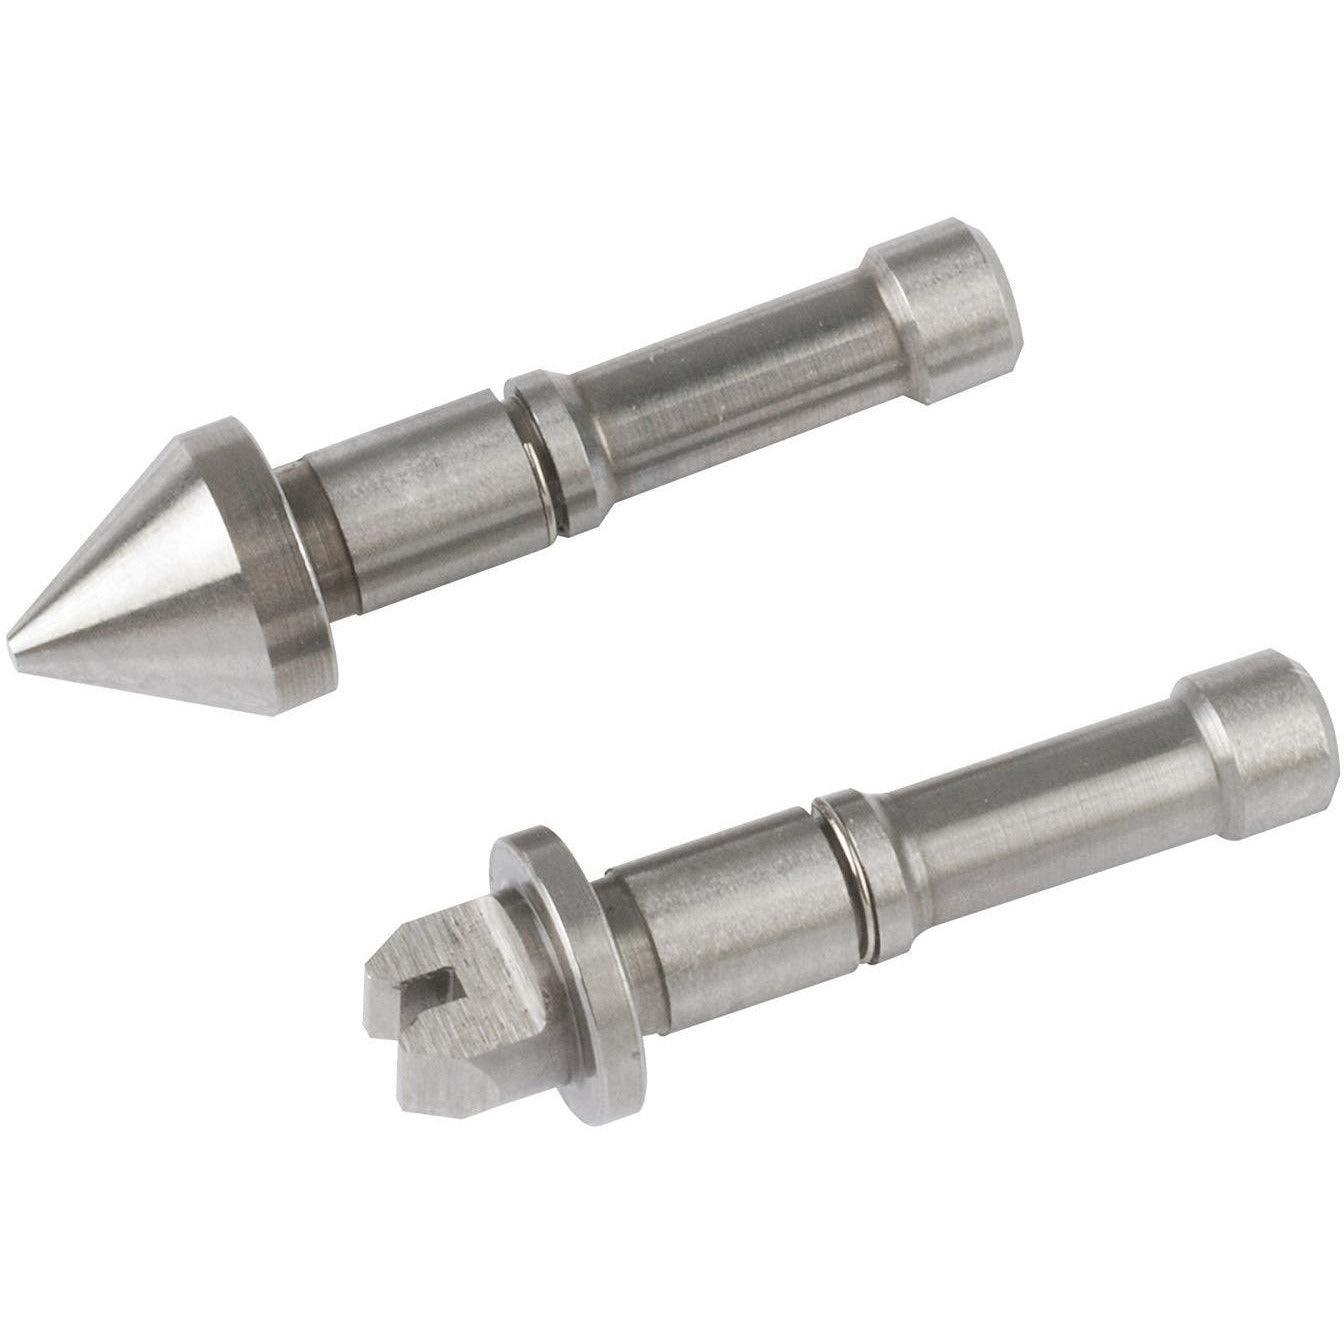 Mitutoyo Anvil and Spindle Tip 3.5-5mm/8-5TPI-Mitutoyo-Tool Factory